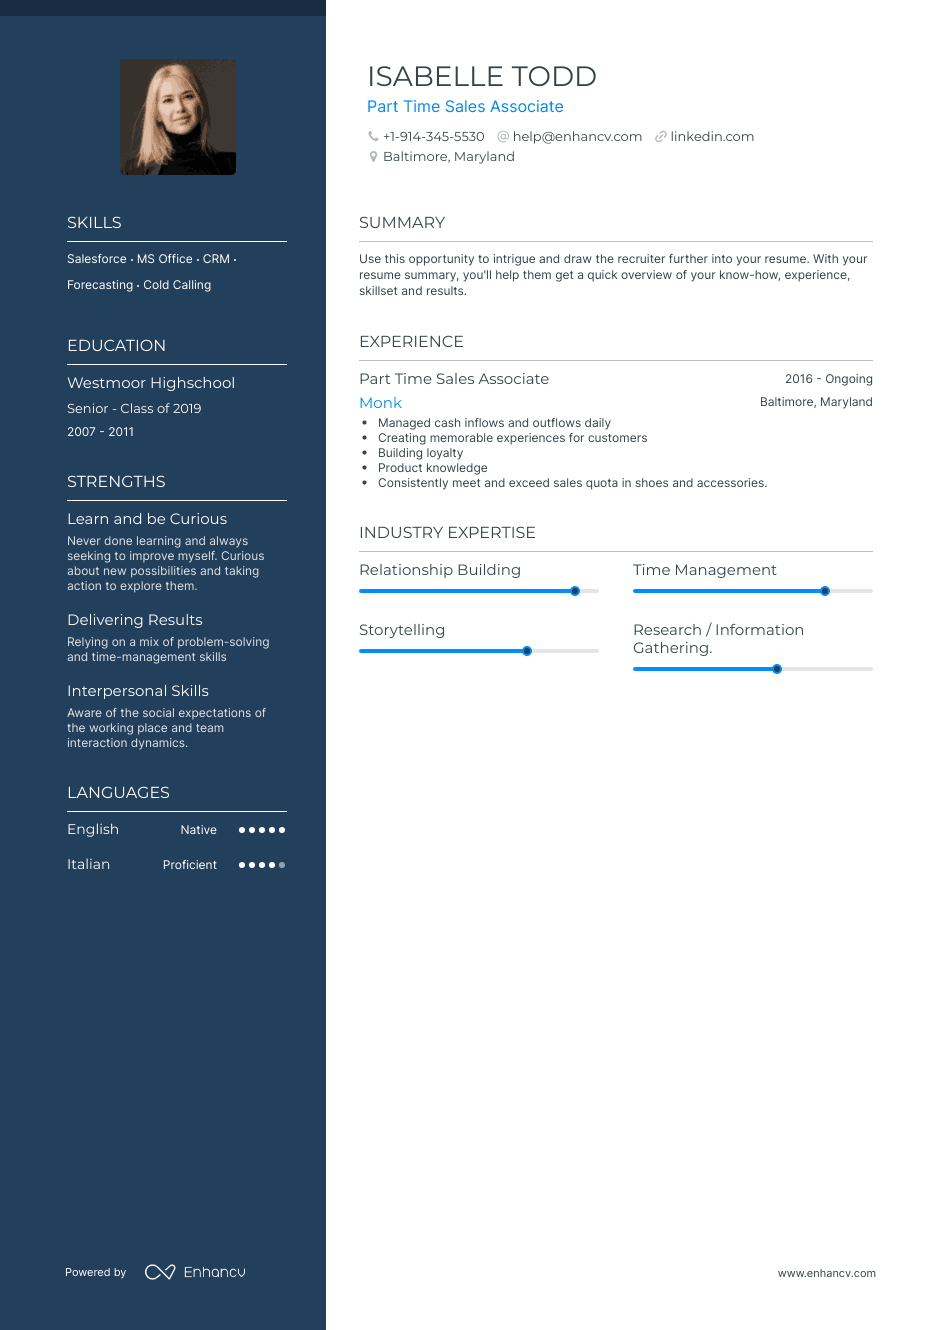 Part Time Sales Associate resume example